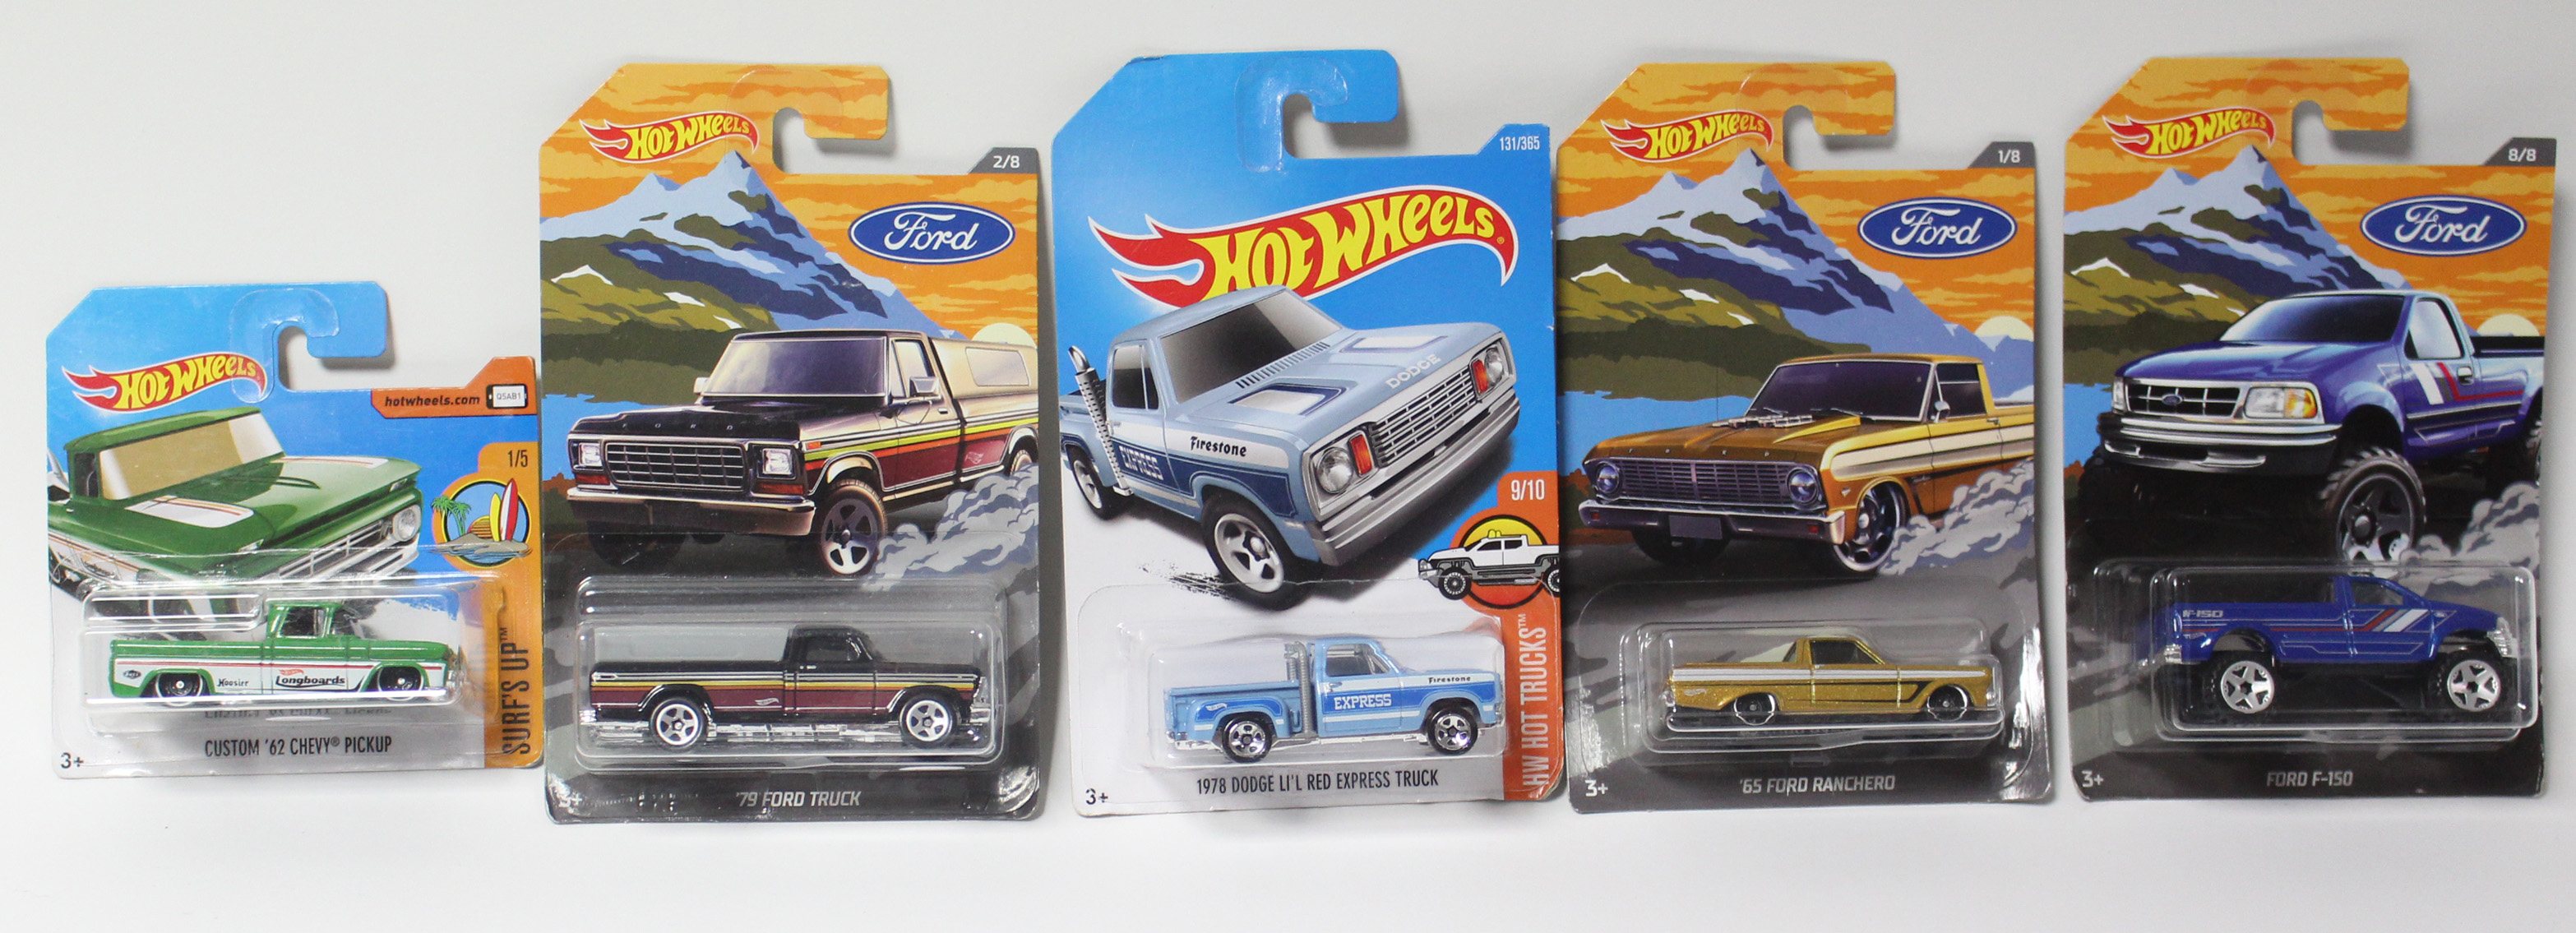 Fourteen Hot Wheels scale models each with original packaging. - Image 3 of 3